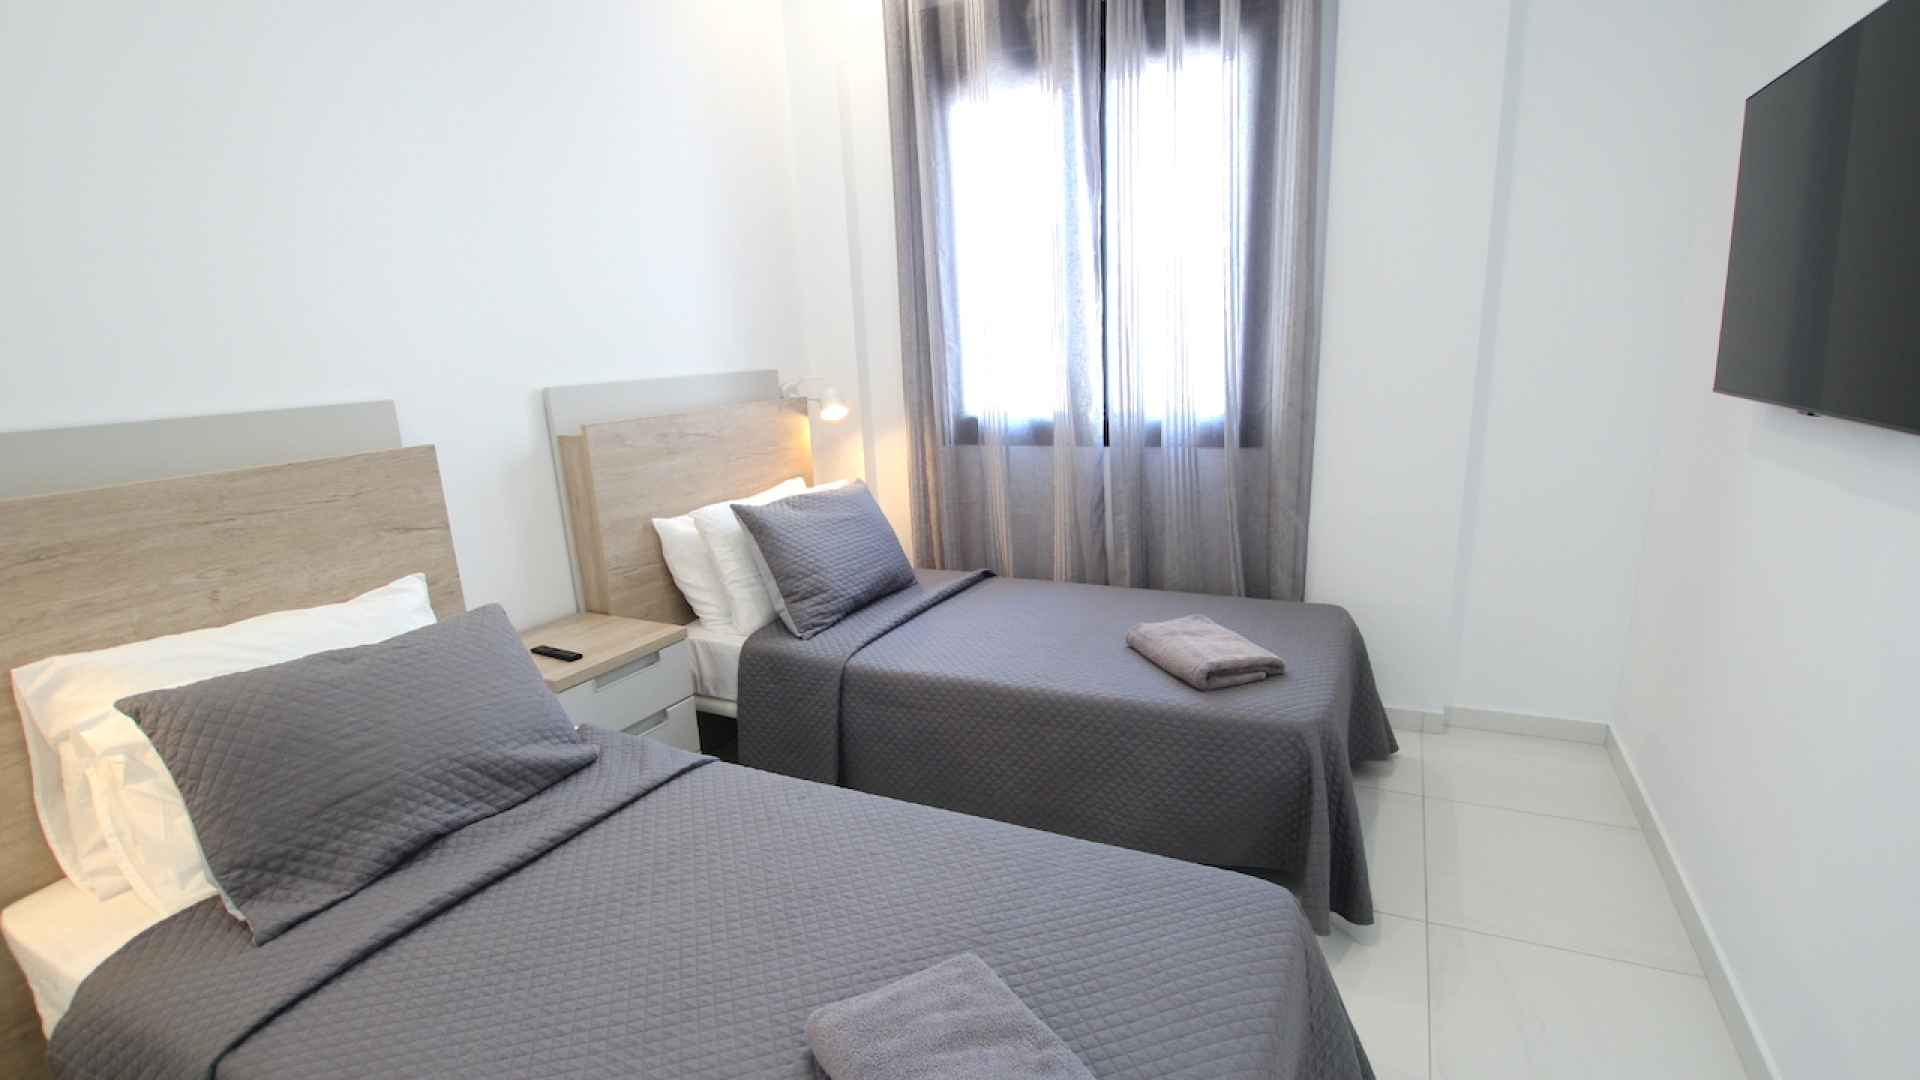 48308_stunning_3_bedroom_villa_in_a_highly_sough_after_location_201223102908_img_5089